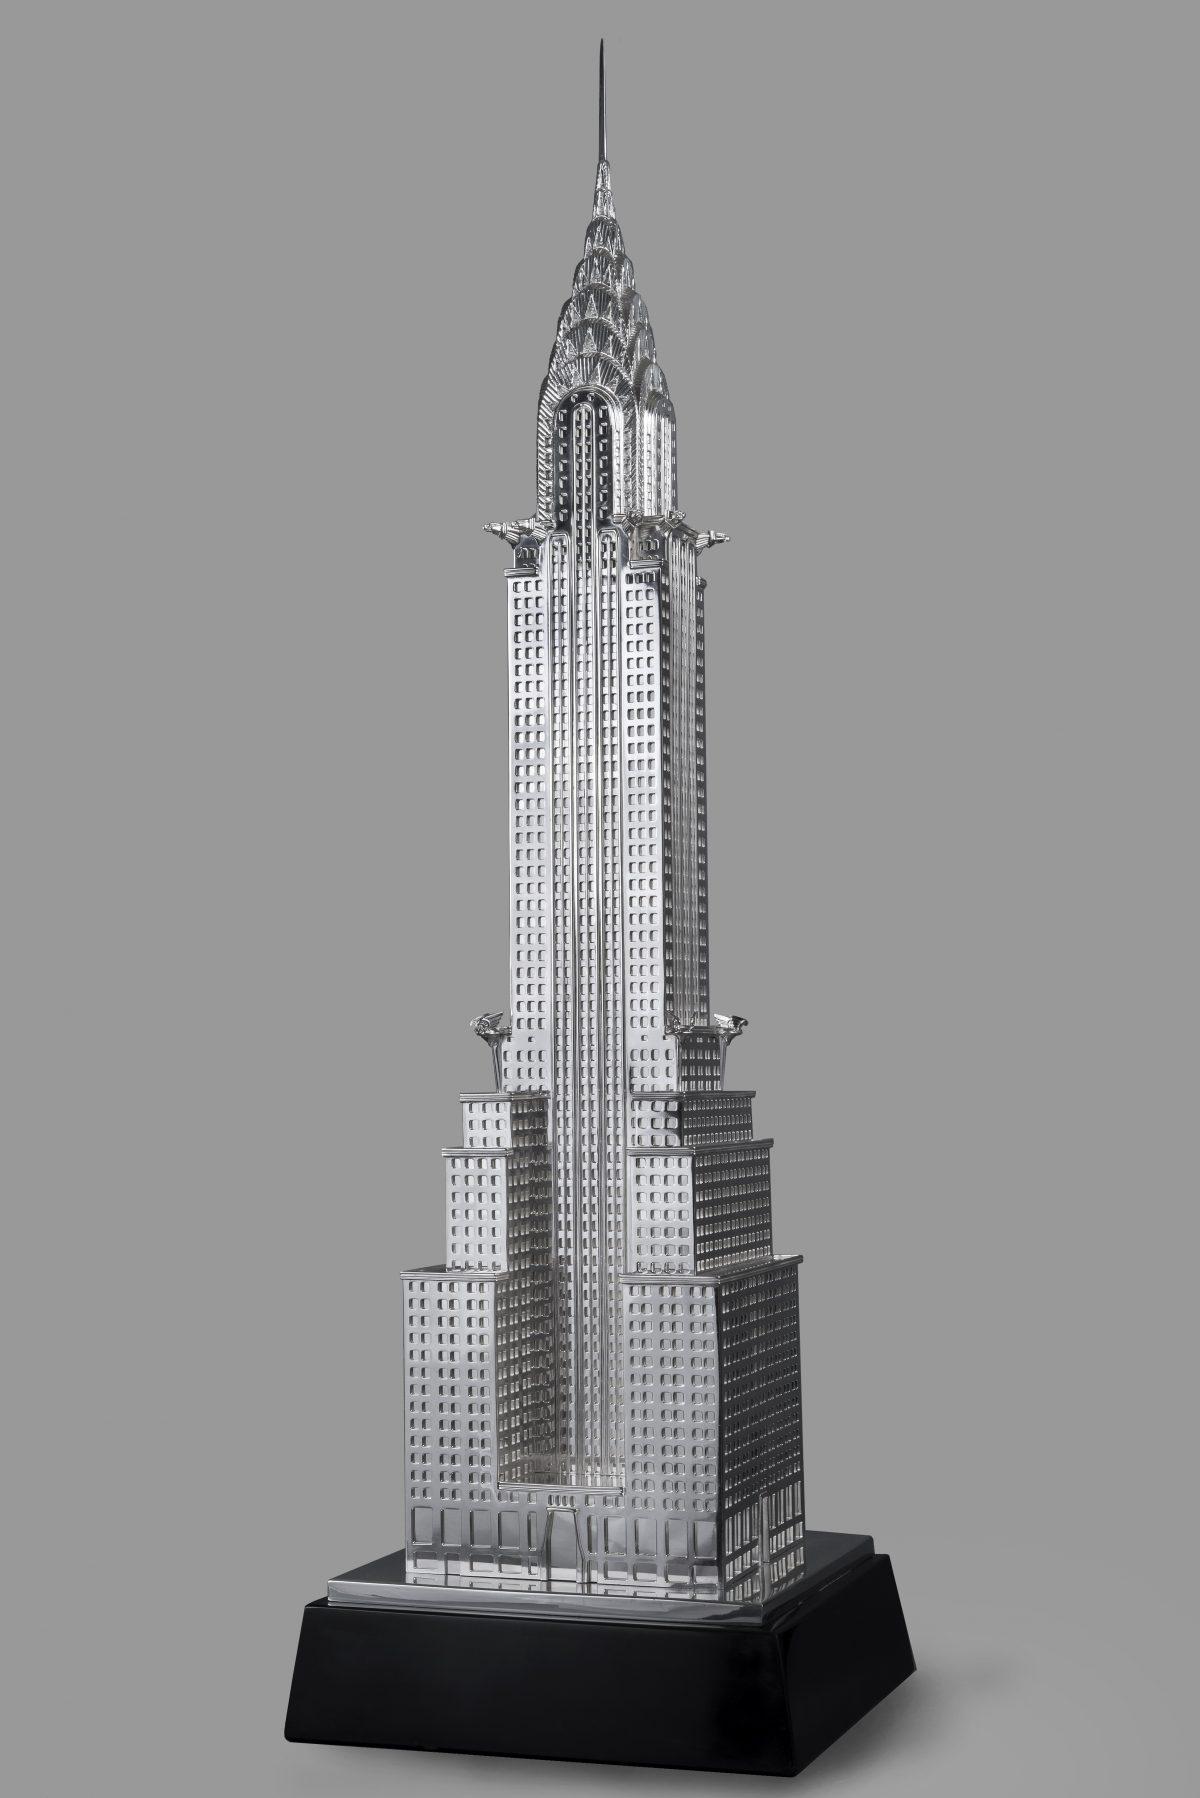 The Argentiere Pagliai Chrysler Building of New York rendered in solid sterling silver, stands 32 11/16 inches tall and is mounted on a black marble base. The skyscraper took 600 hours to create. (Lorenzo Michelini/Argentiere Pagliai)